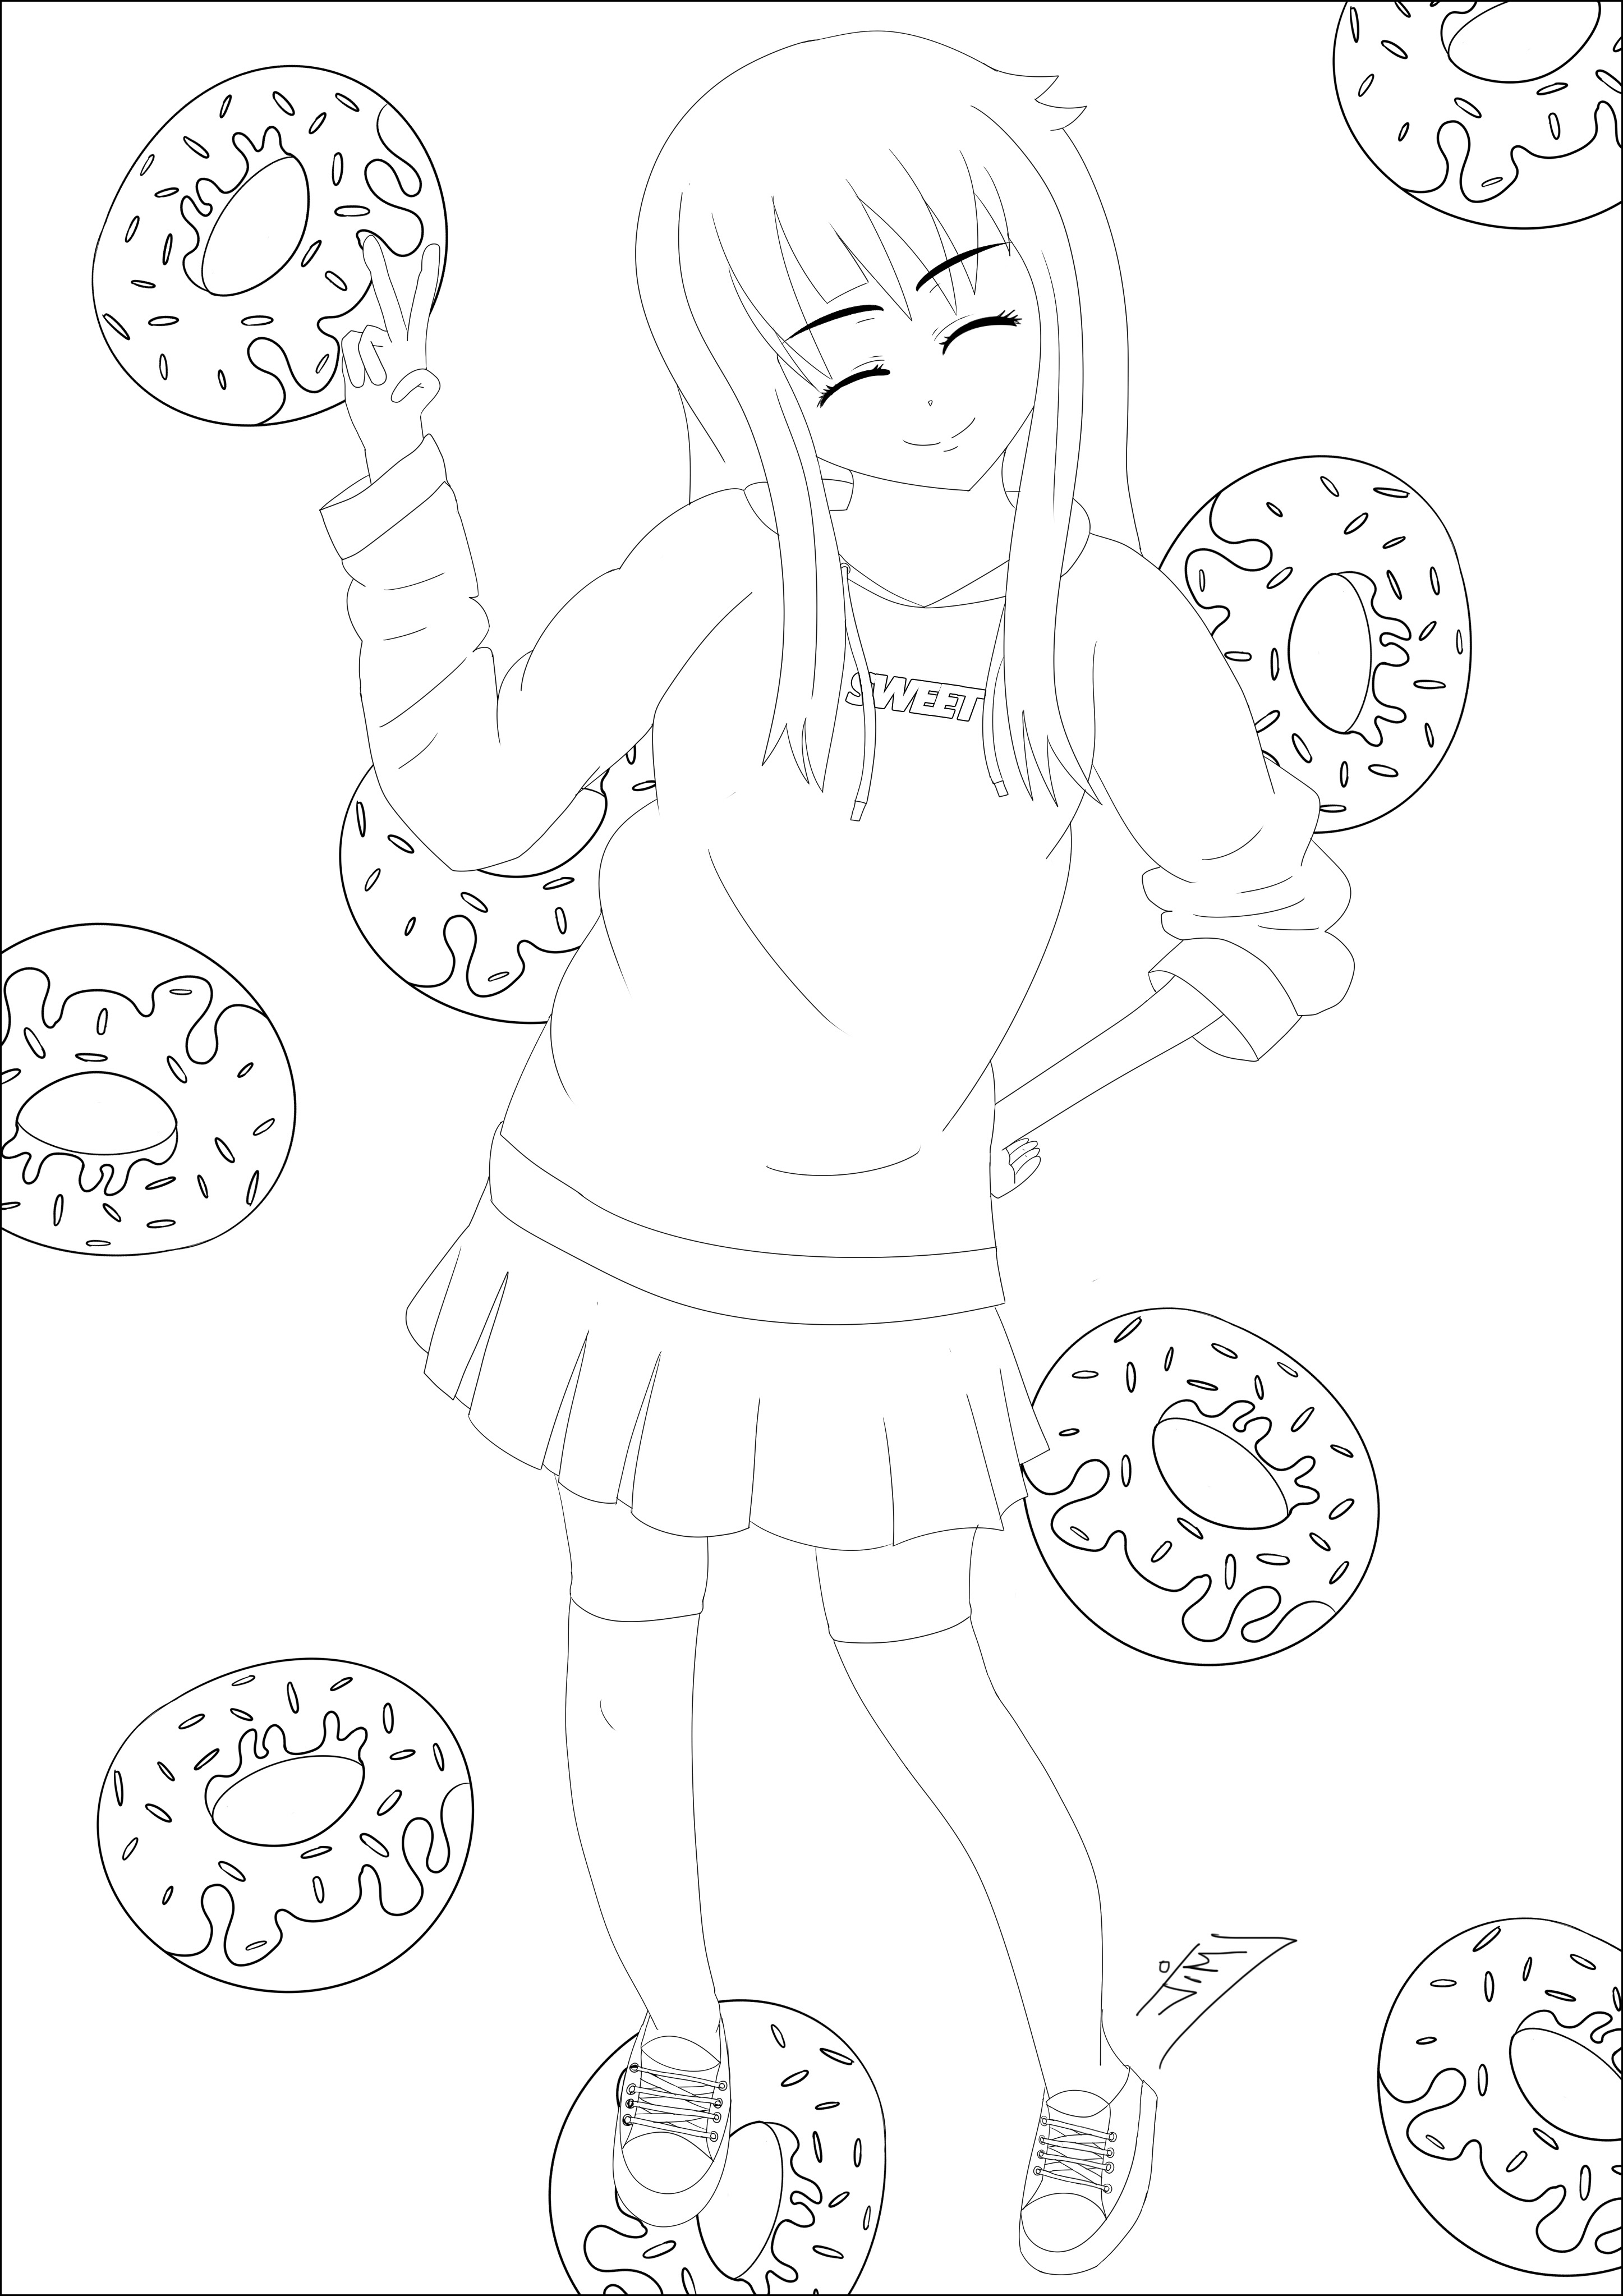 Girl and a shower of donuts. A very Manga / Anime style drawing